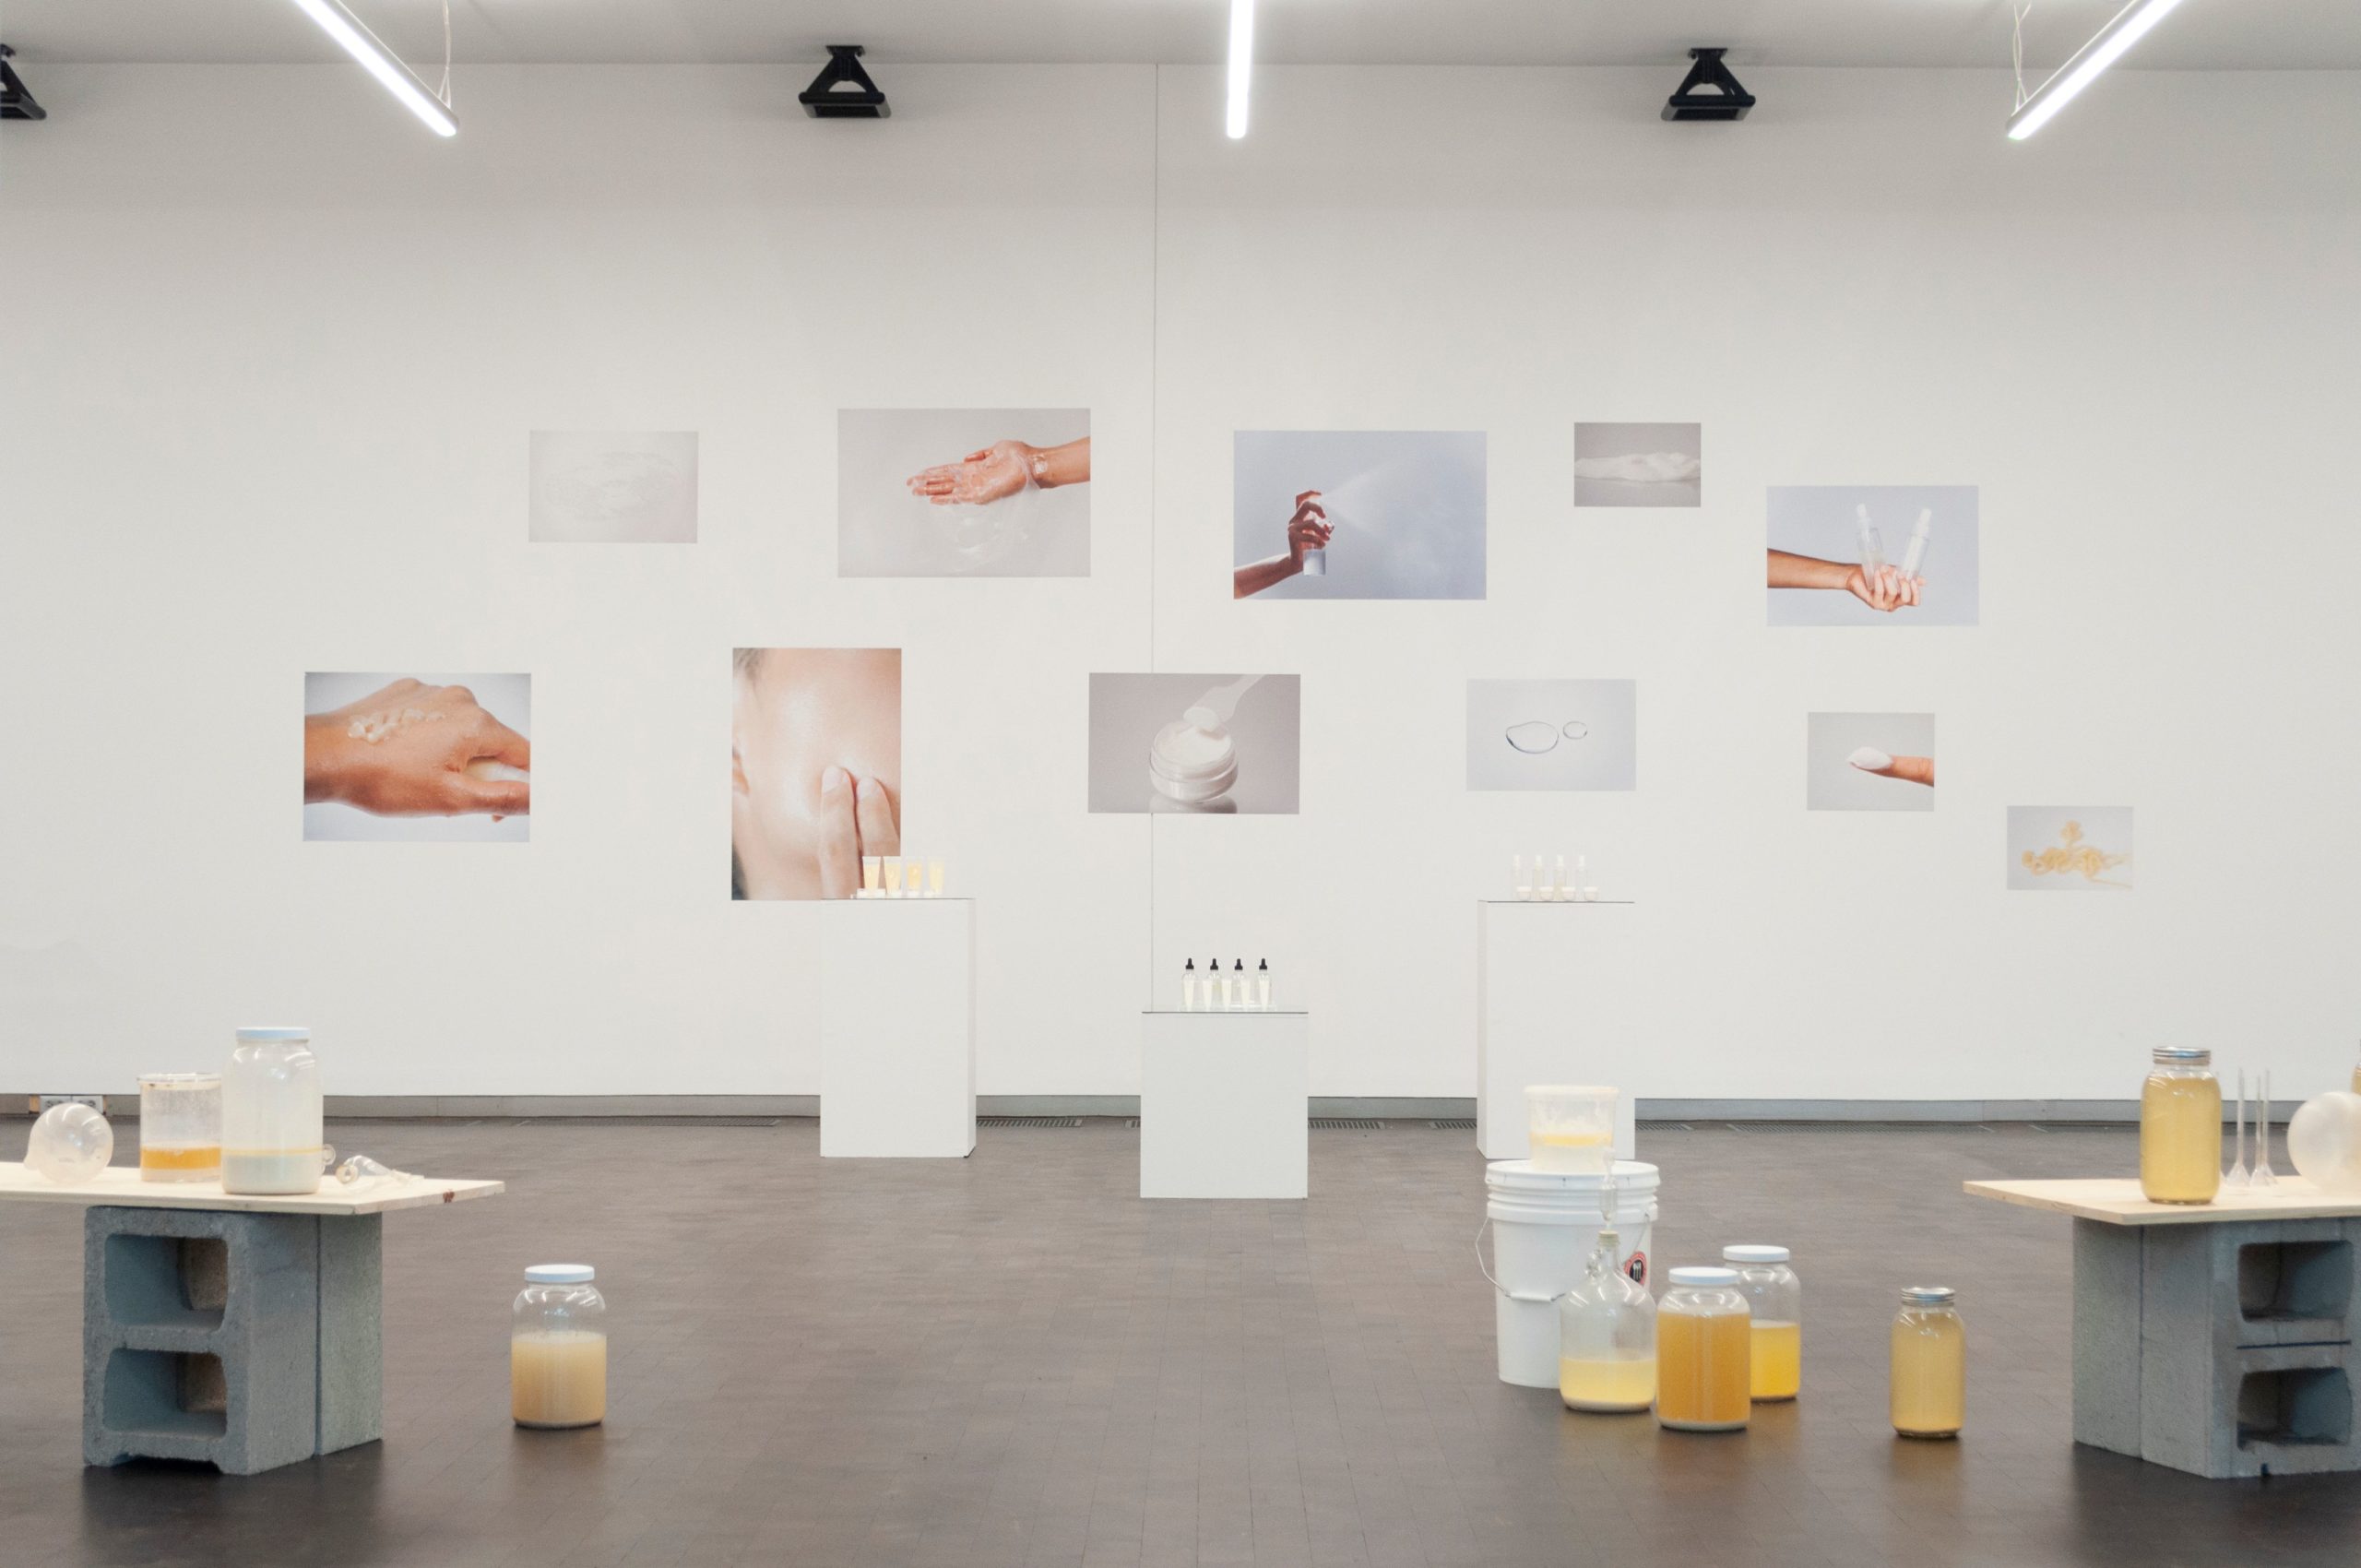 A shot of a room with various canisters filled with yellowish liquids displayed on cement blocks in various shelf sizes, with images of hands and skin holding bottles and spraying foam on the far wall.